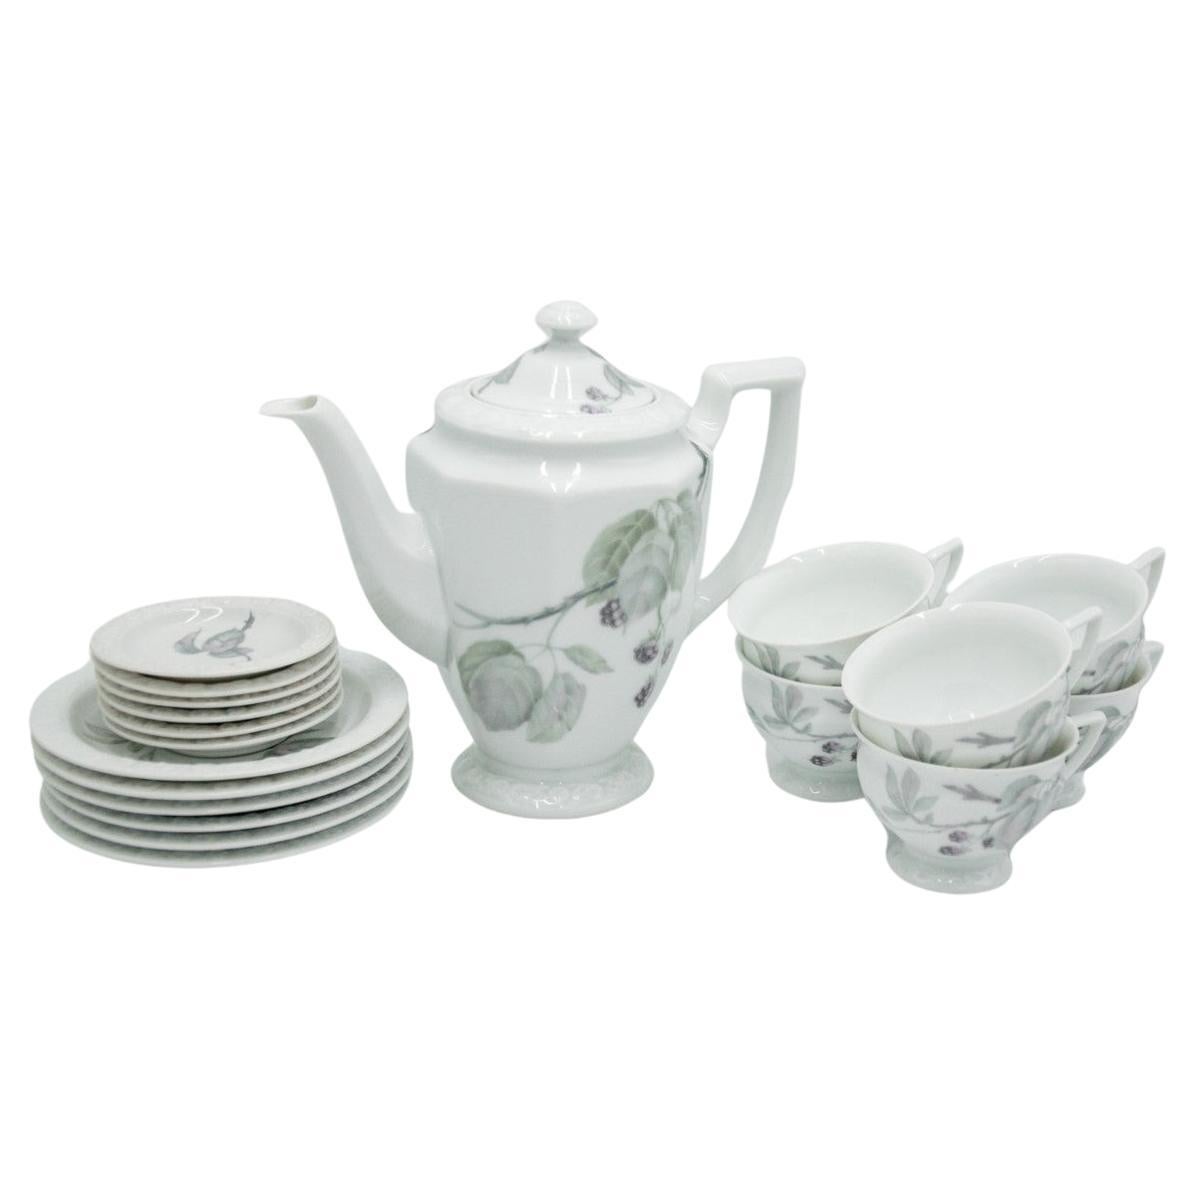 Rosenthal White Maria porcelain service, Germany. For Sale